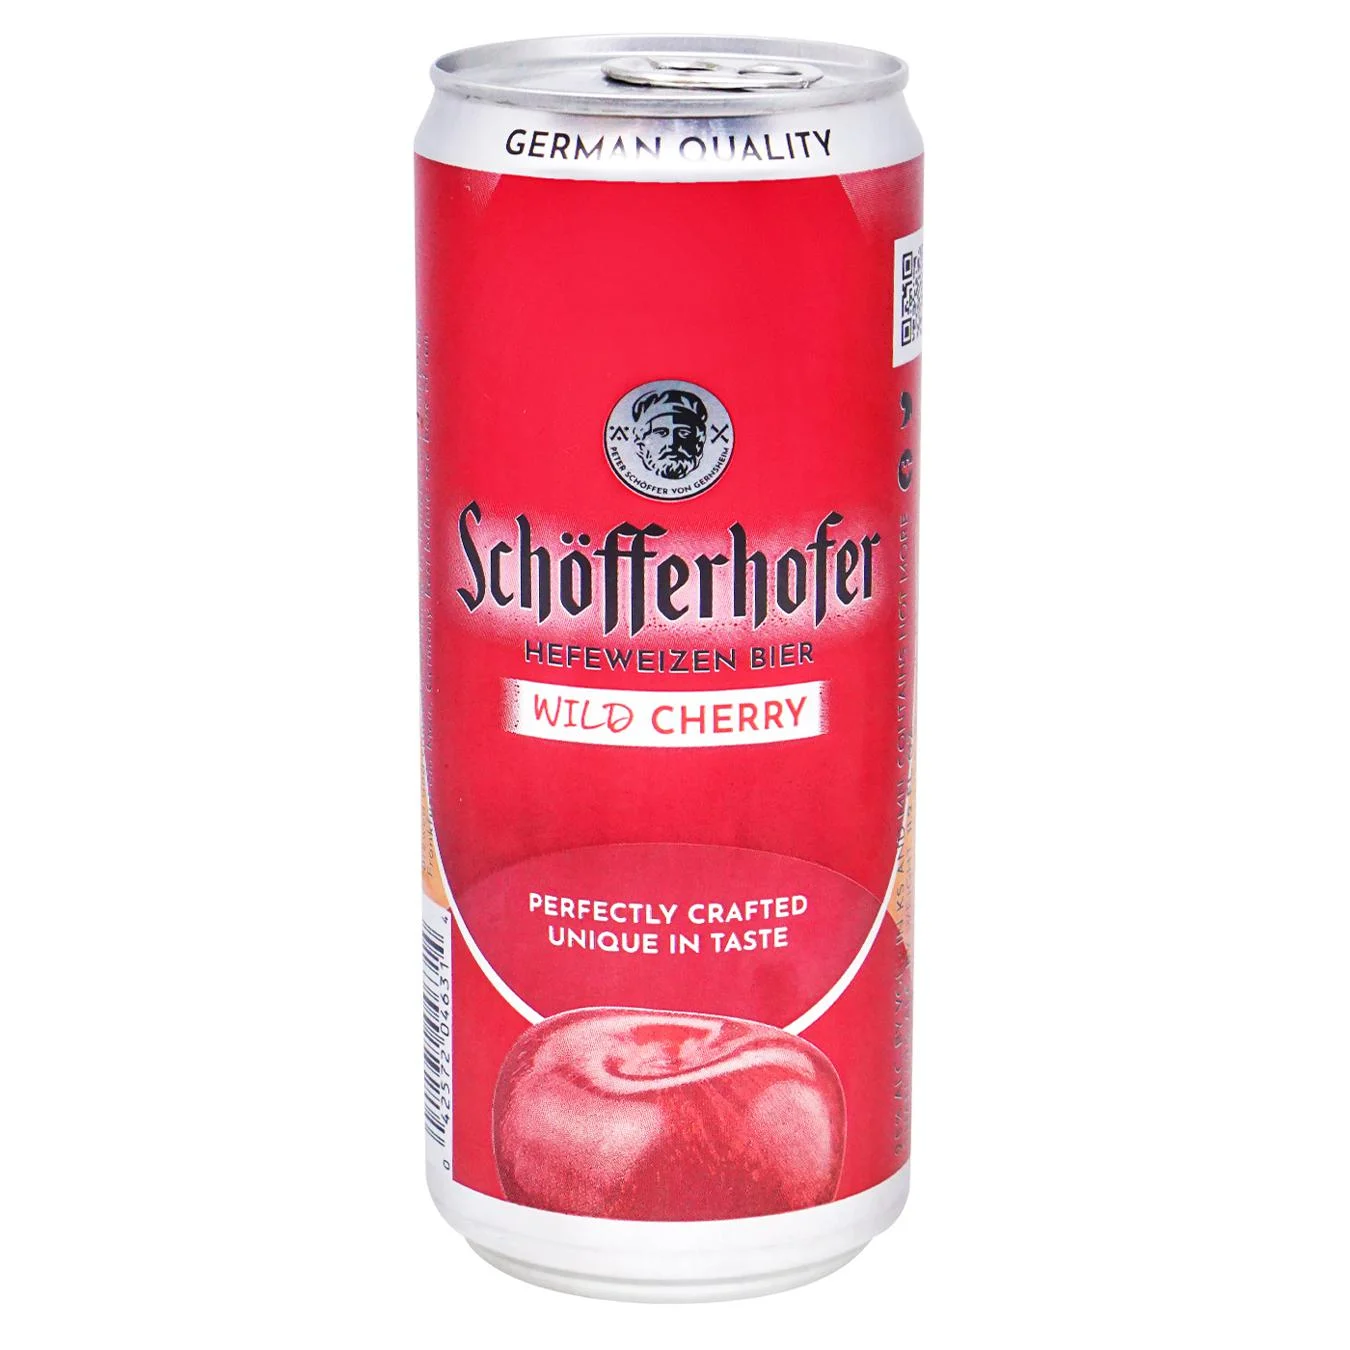 Light beer Schofferhofer with a taste of cherry 2.5% 0.33 l iron can